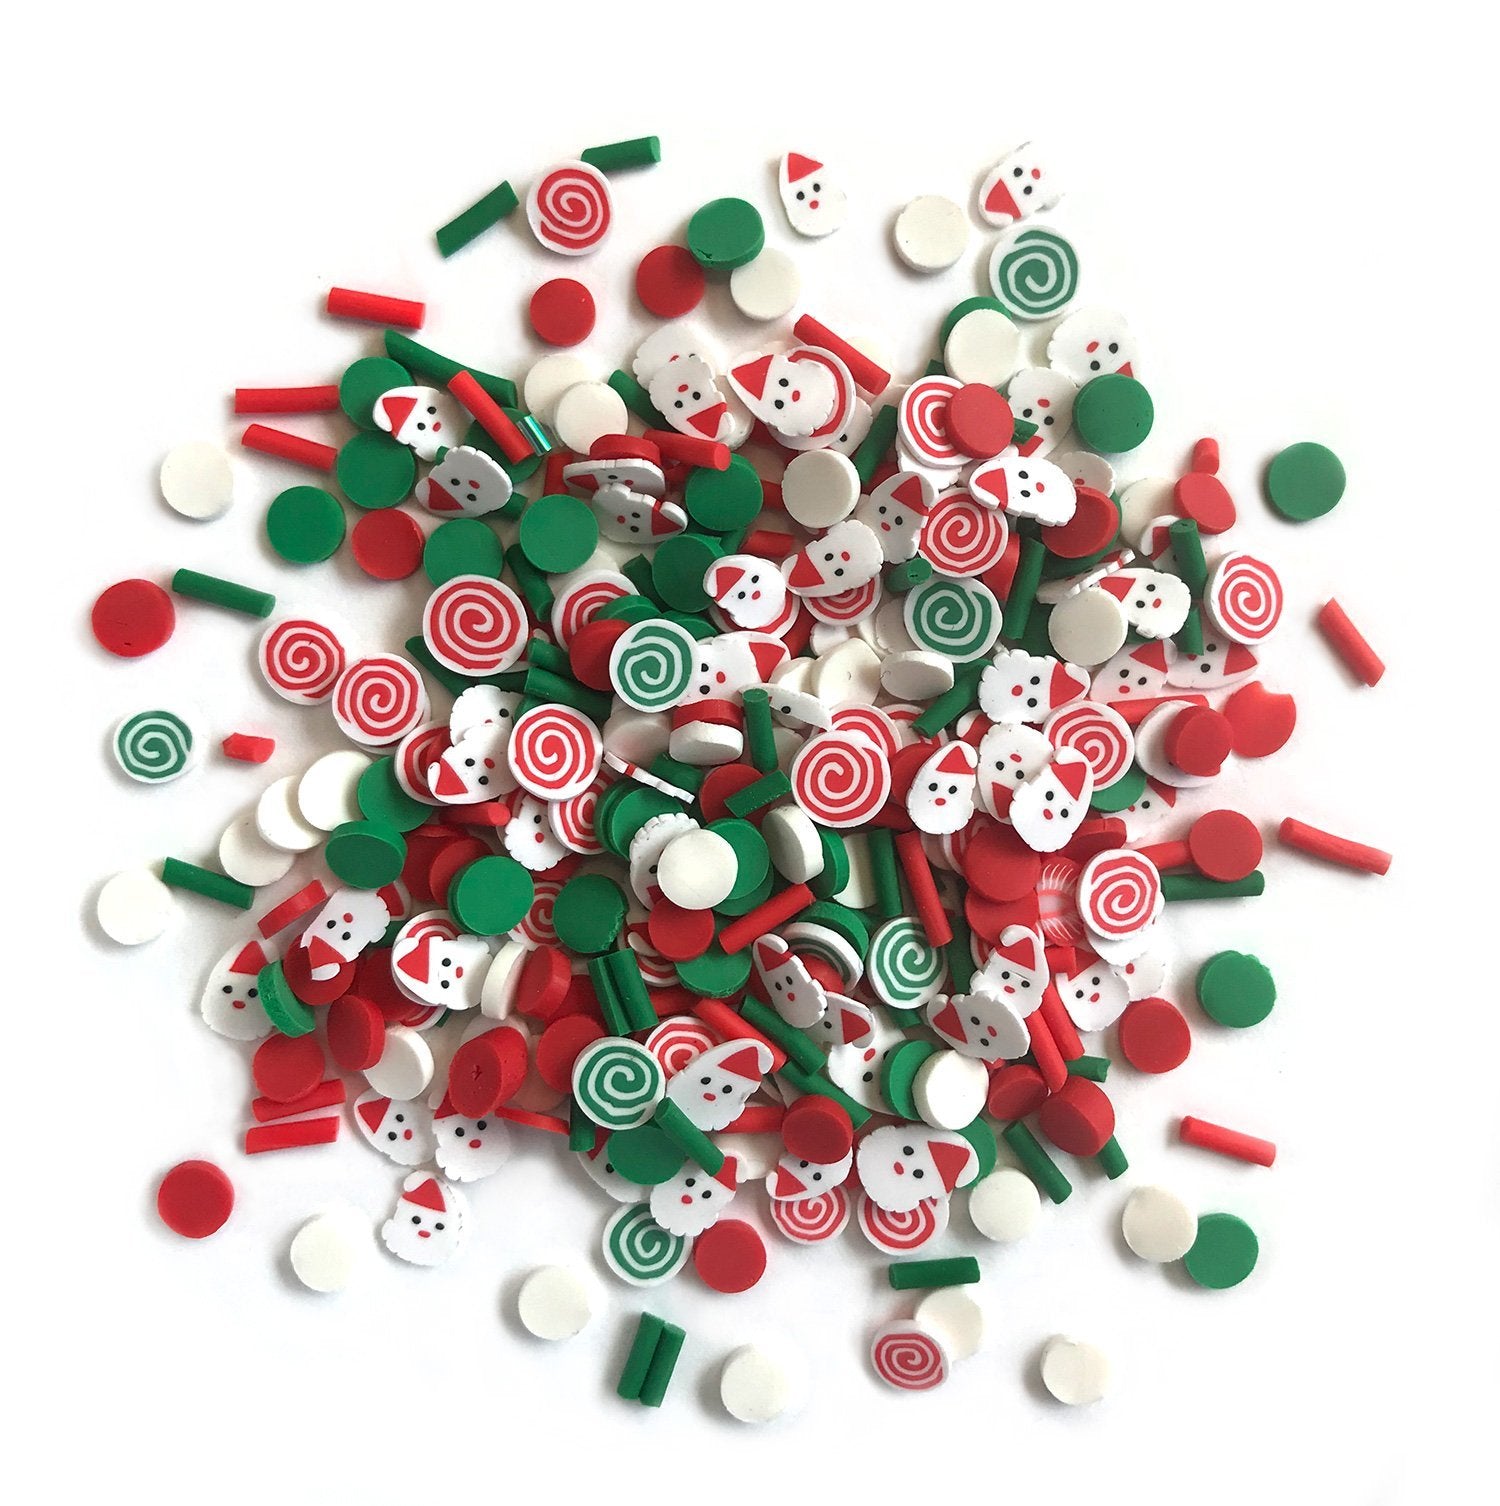 Saint Nick - NK119 - Buttons Galore and More